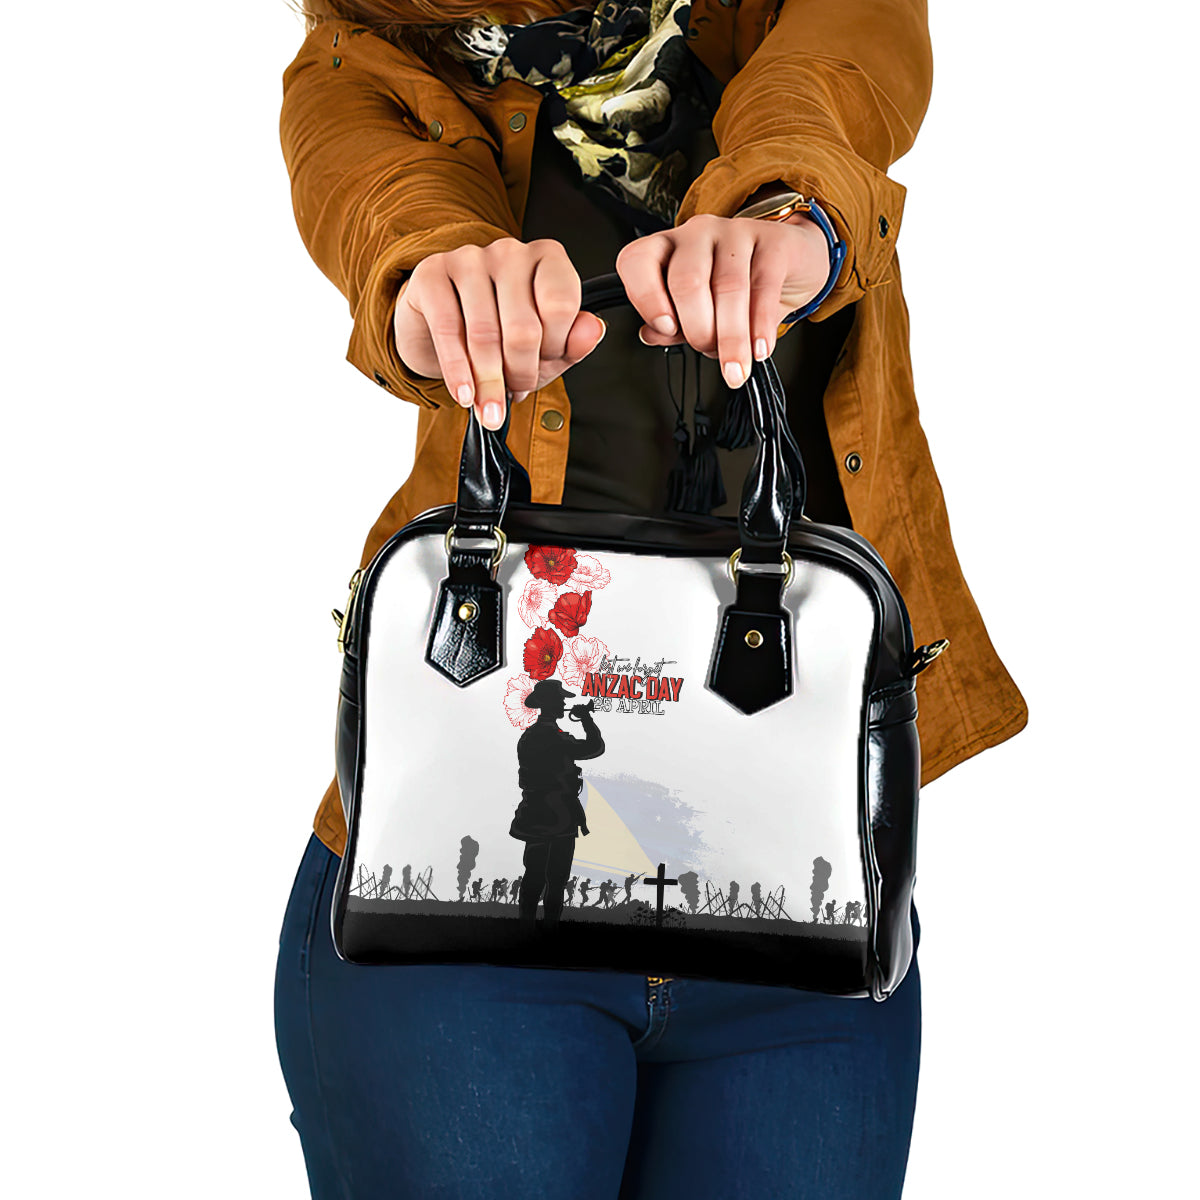 Tokelau ANZAC Day Shoulder Handbag Lest We Forget Red Poppy Flowers and Soldier LT03 One Size White - Polynesian Pride